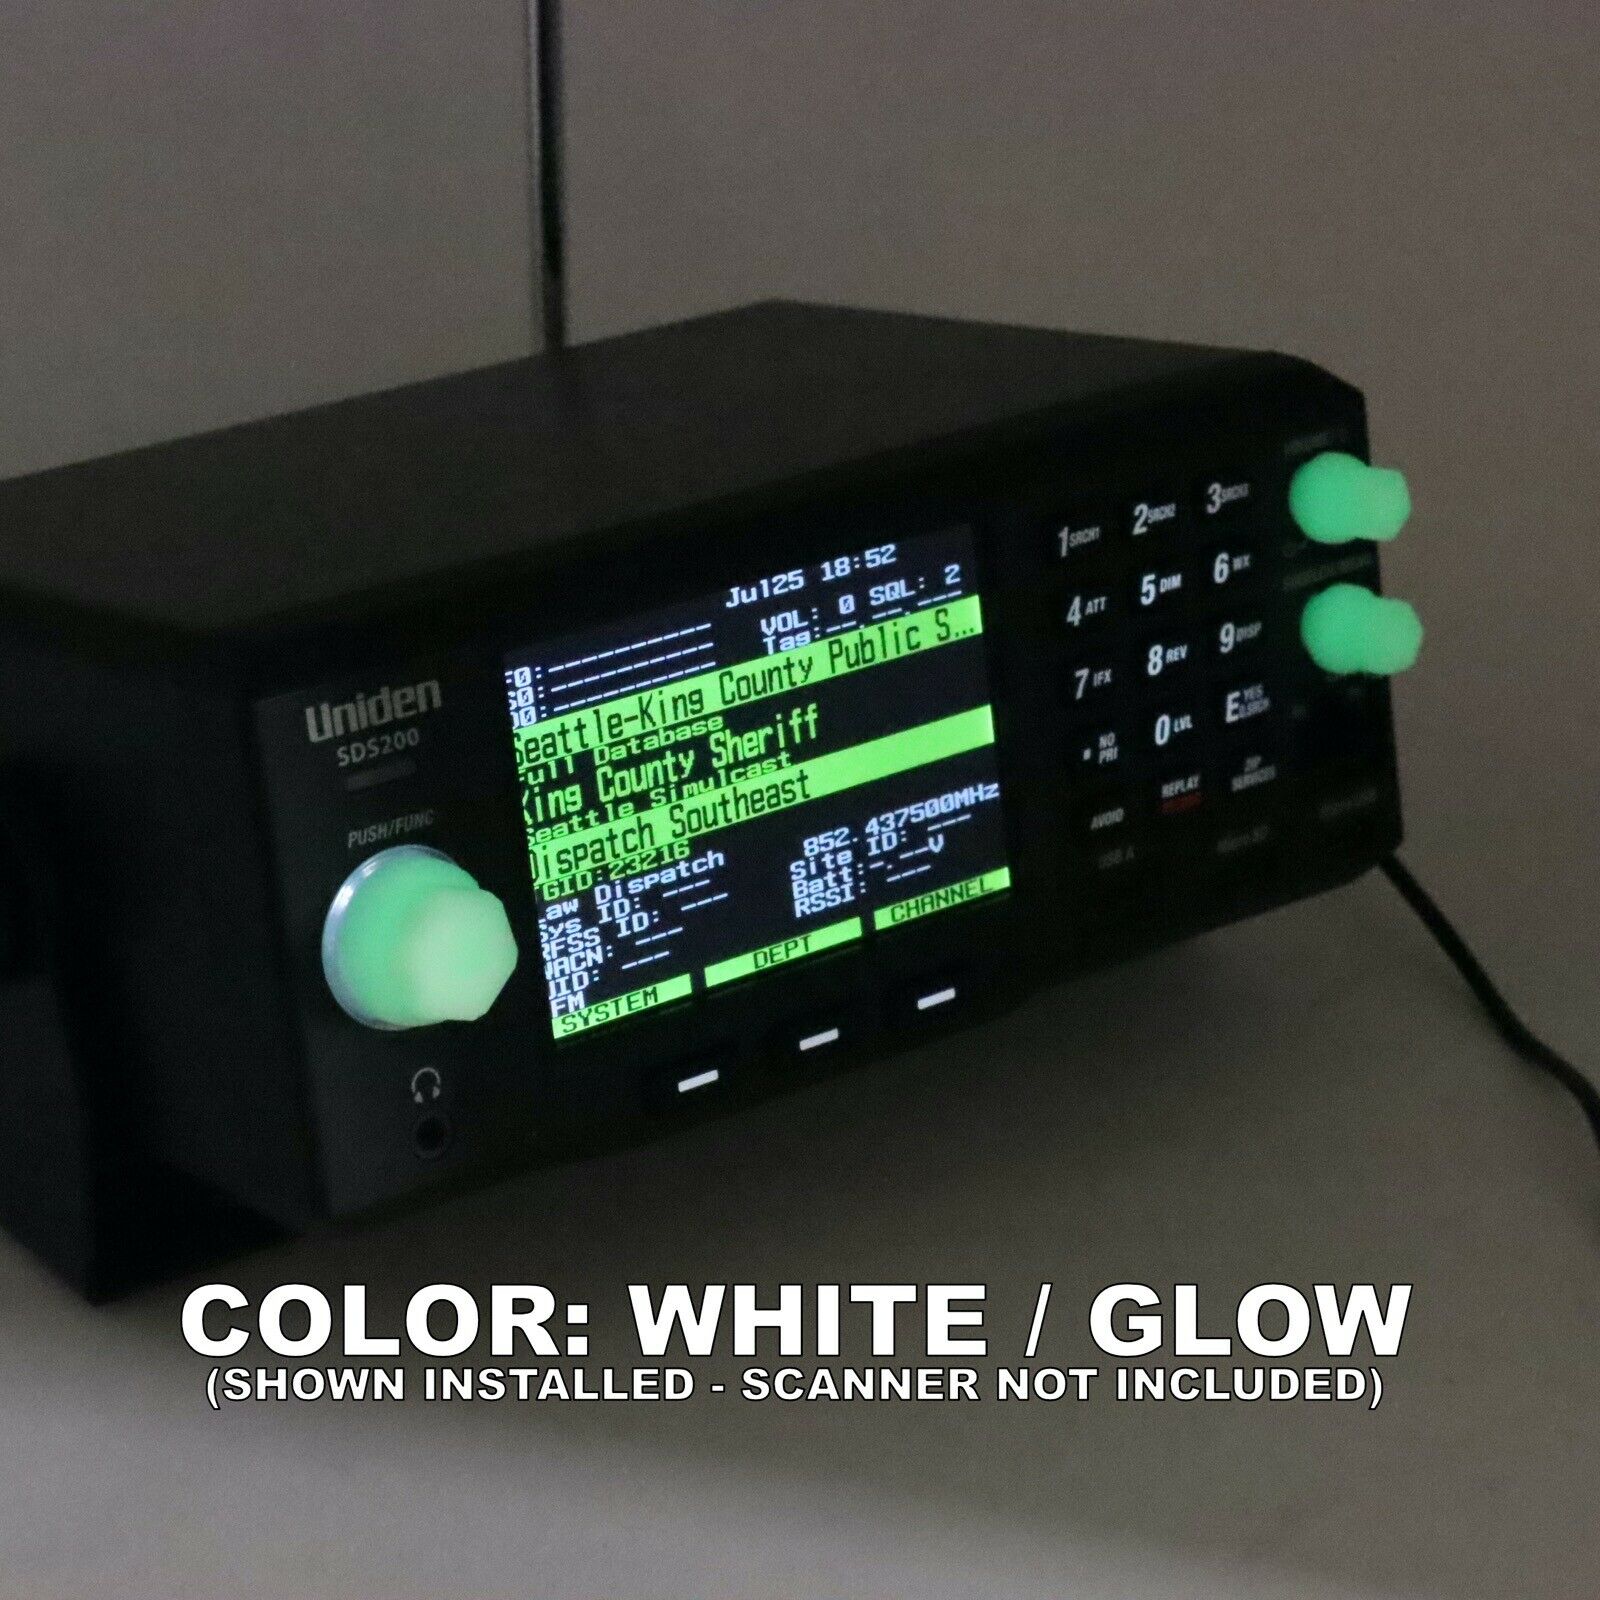 Custom Accessories For Uniden Sds200 Scanner - Glow / Colored Knobs / Desk Stand